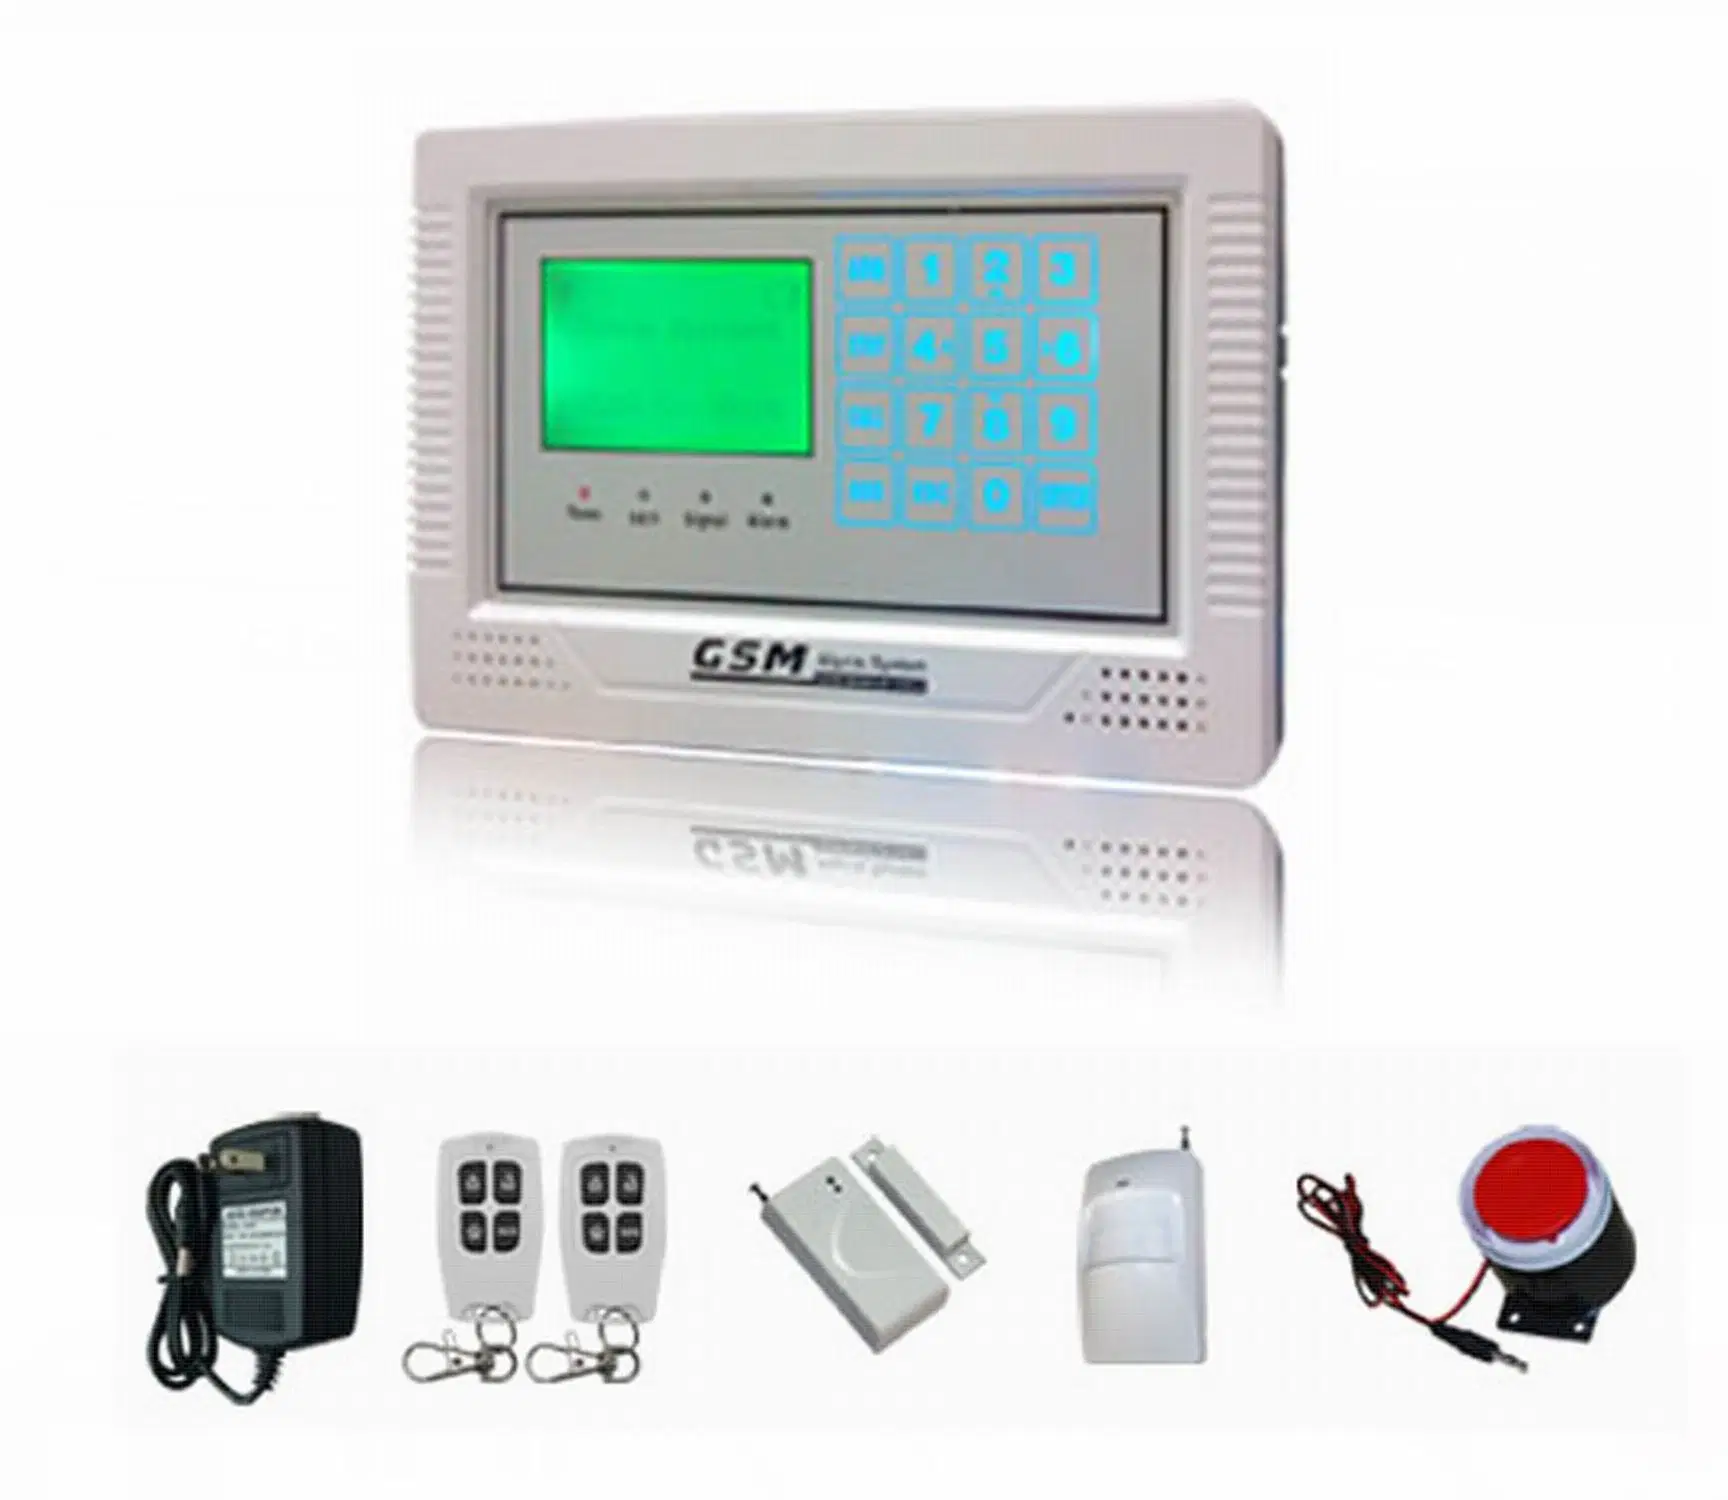 Home Security GSM Burglarproof Alarm System with LCD